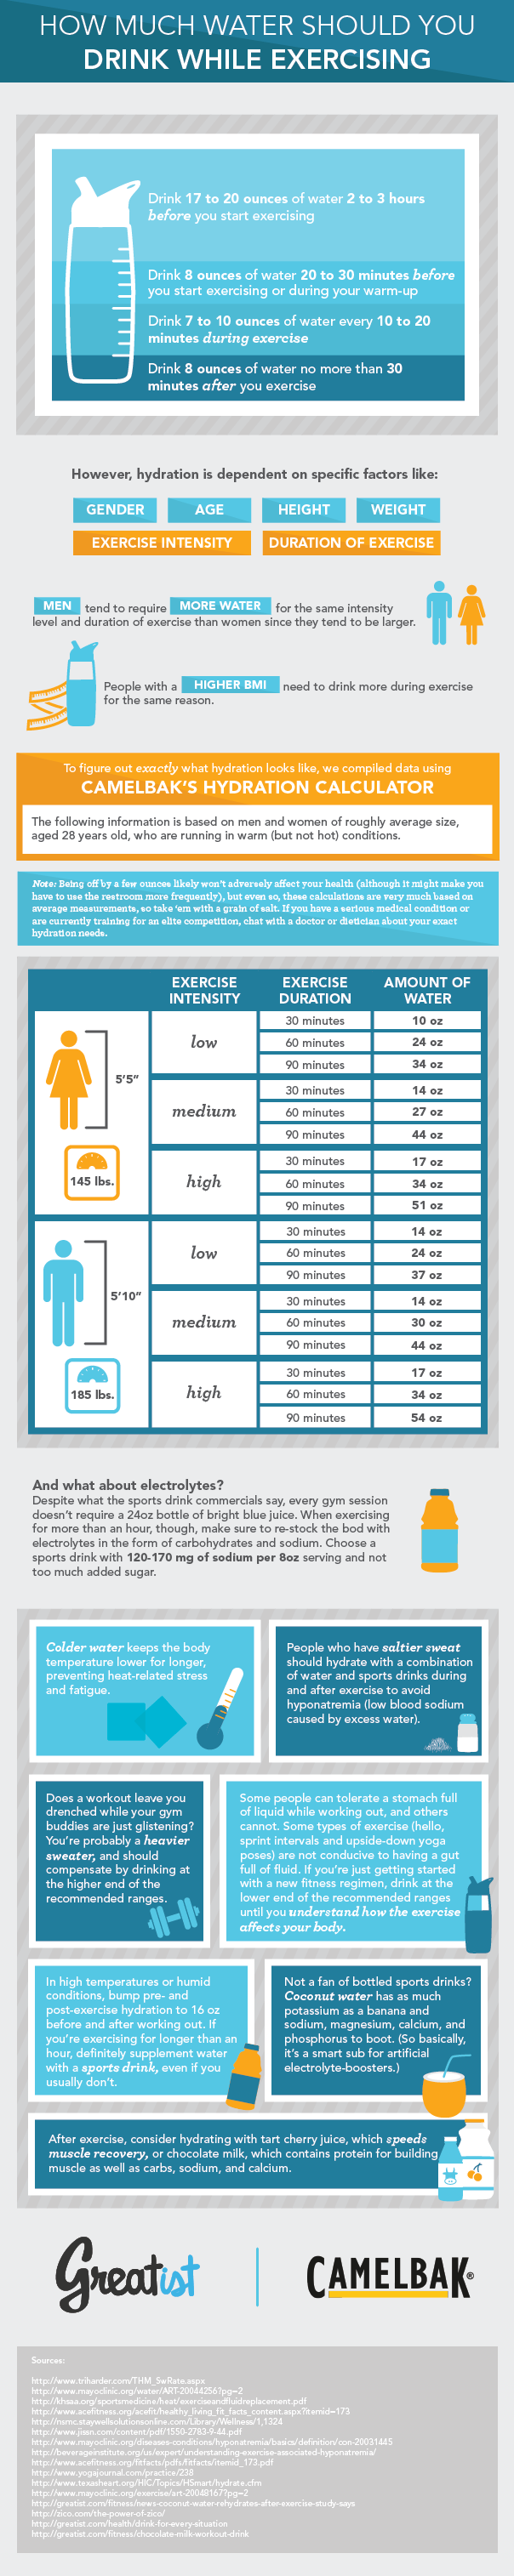 Chart by Camelbak, How much Water to Drink when Exercising